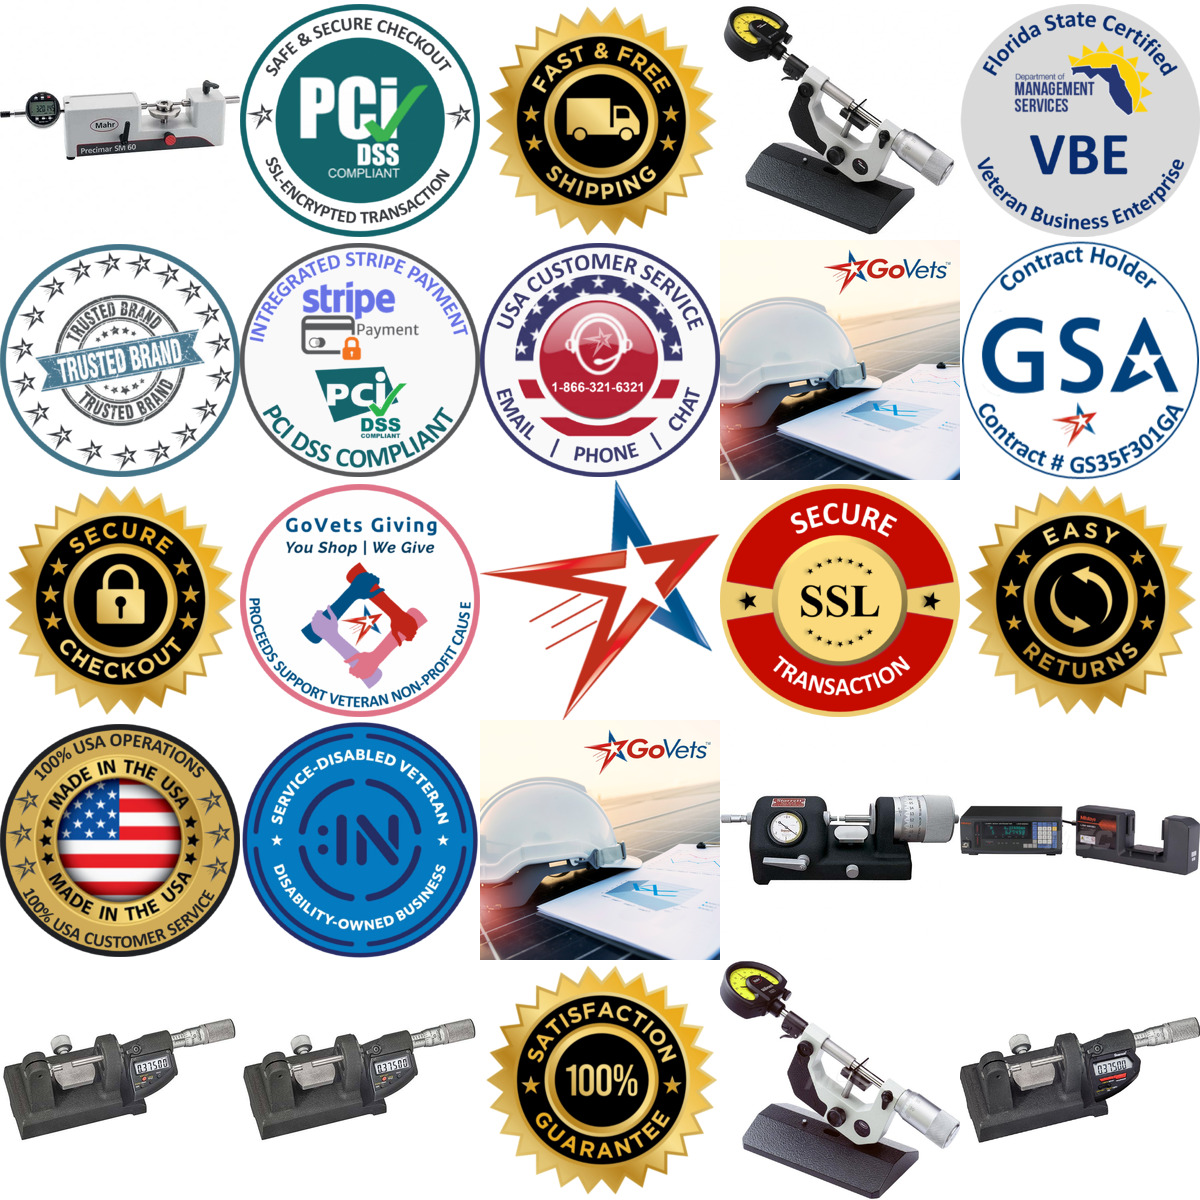 A selection of Bench Micrometers products on GoVets